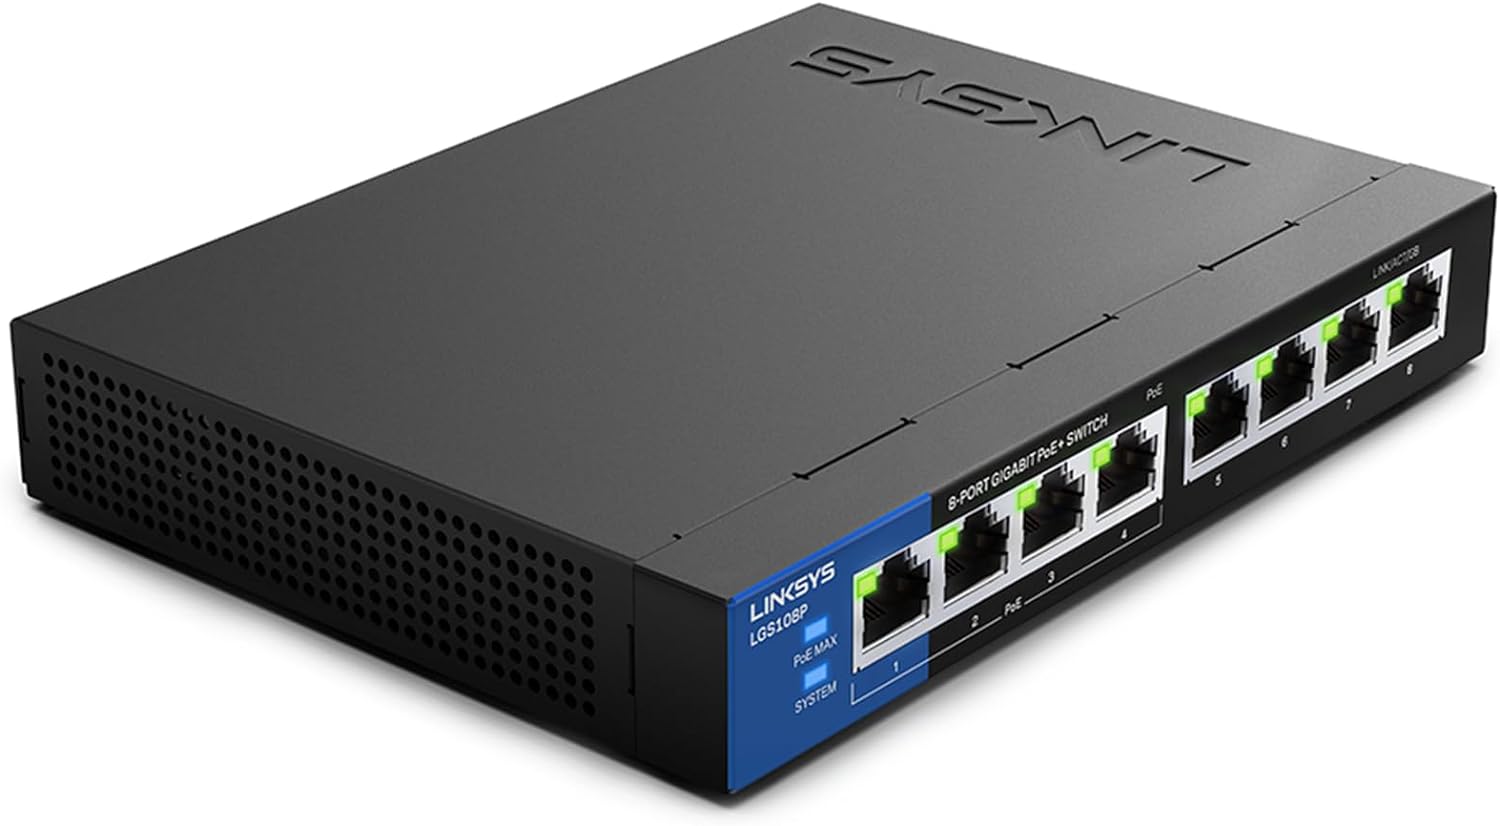 Linksys 8-Port UnManaged Gigabit Switch with 4 PoE+ ports (LGS108P)